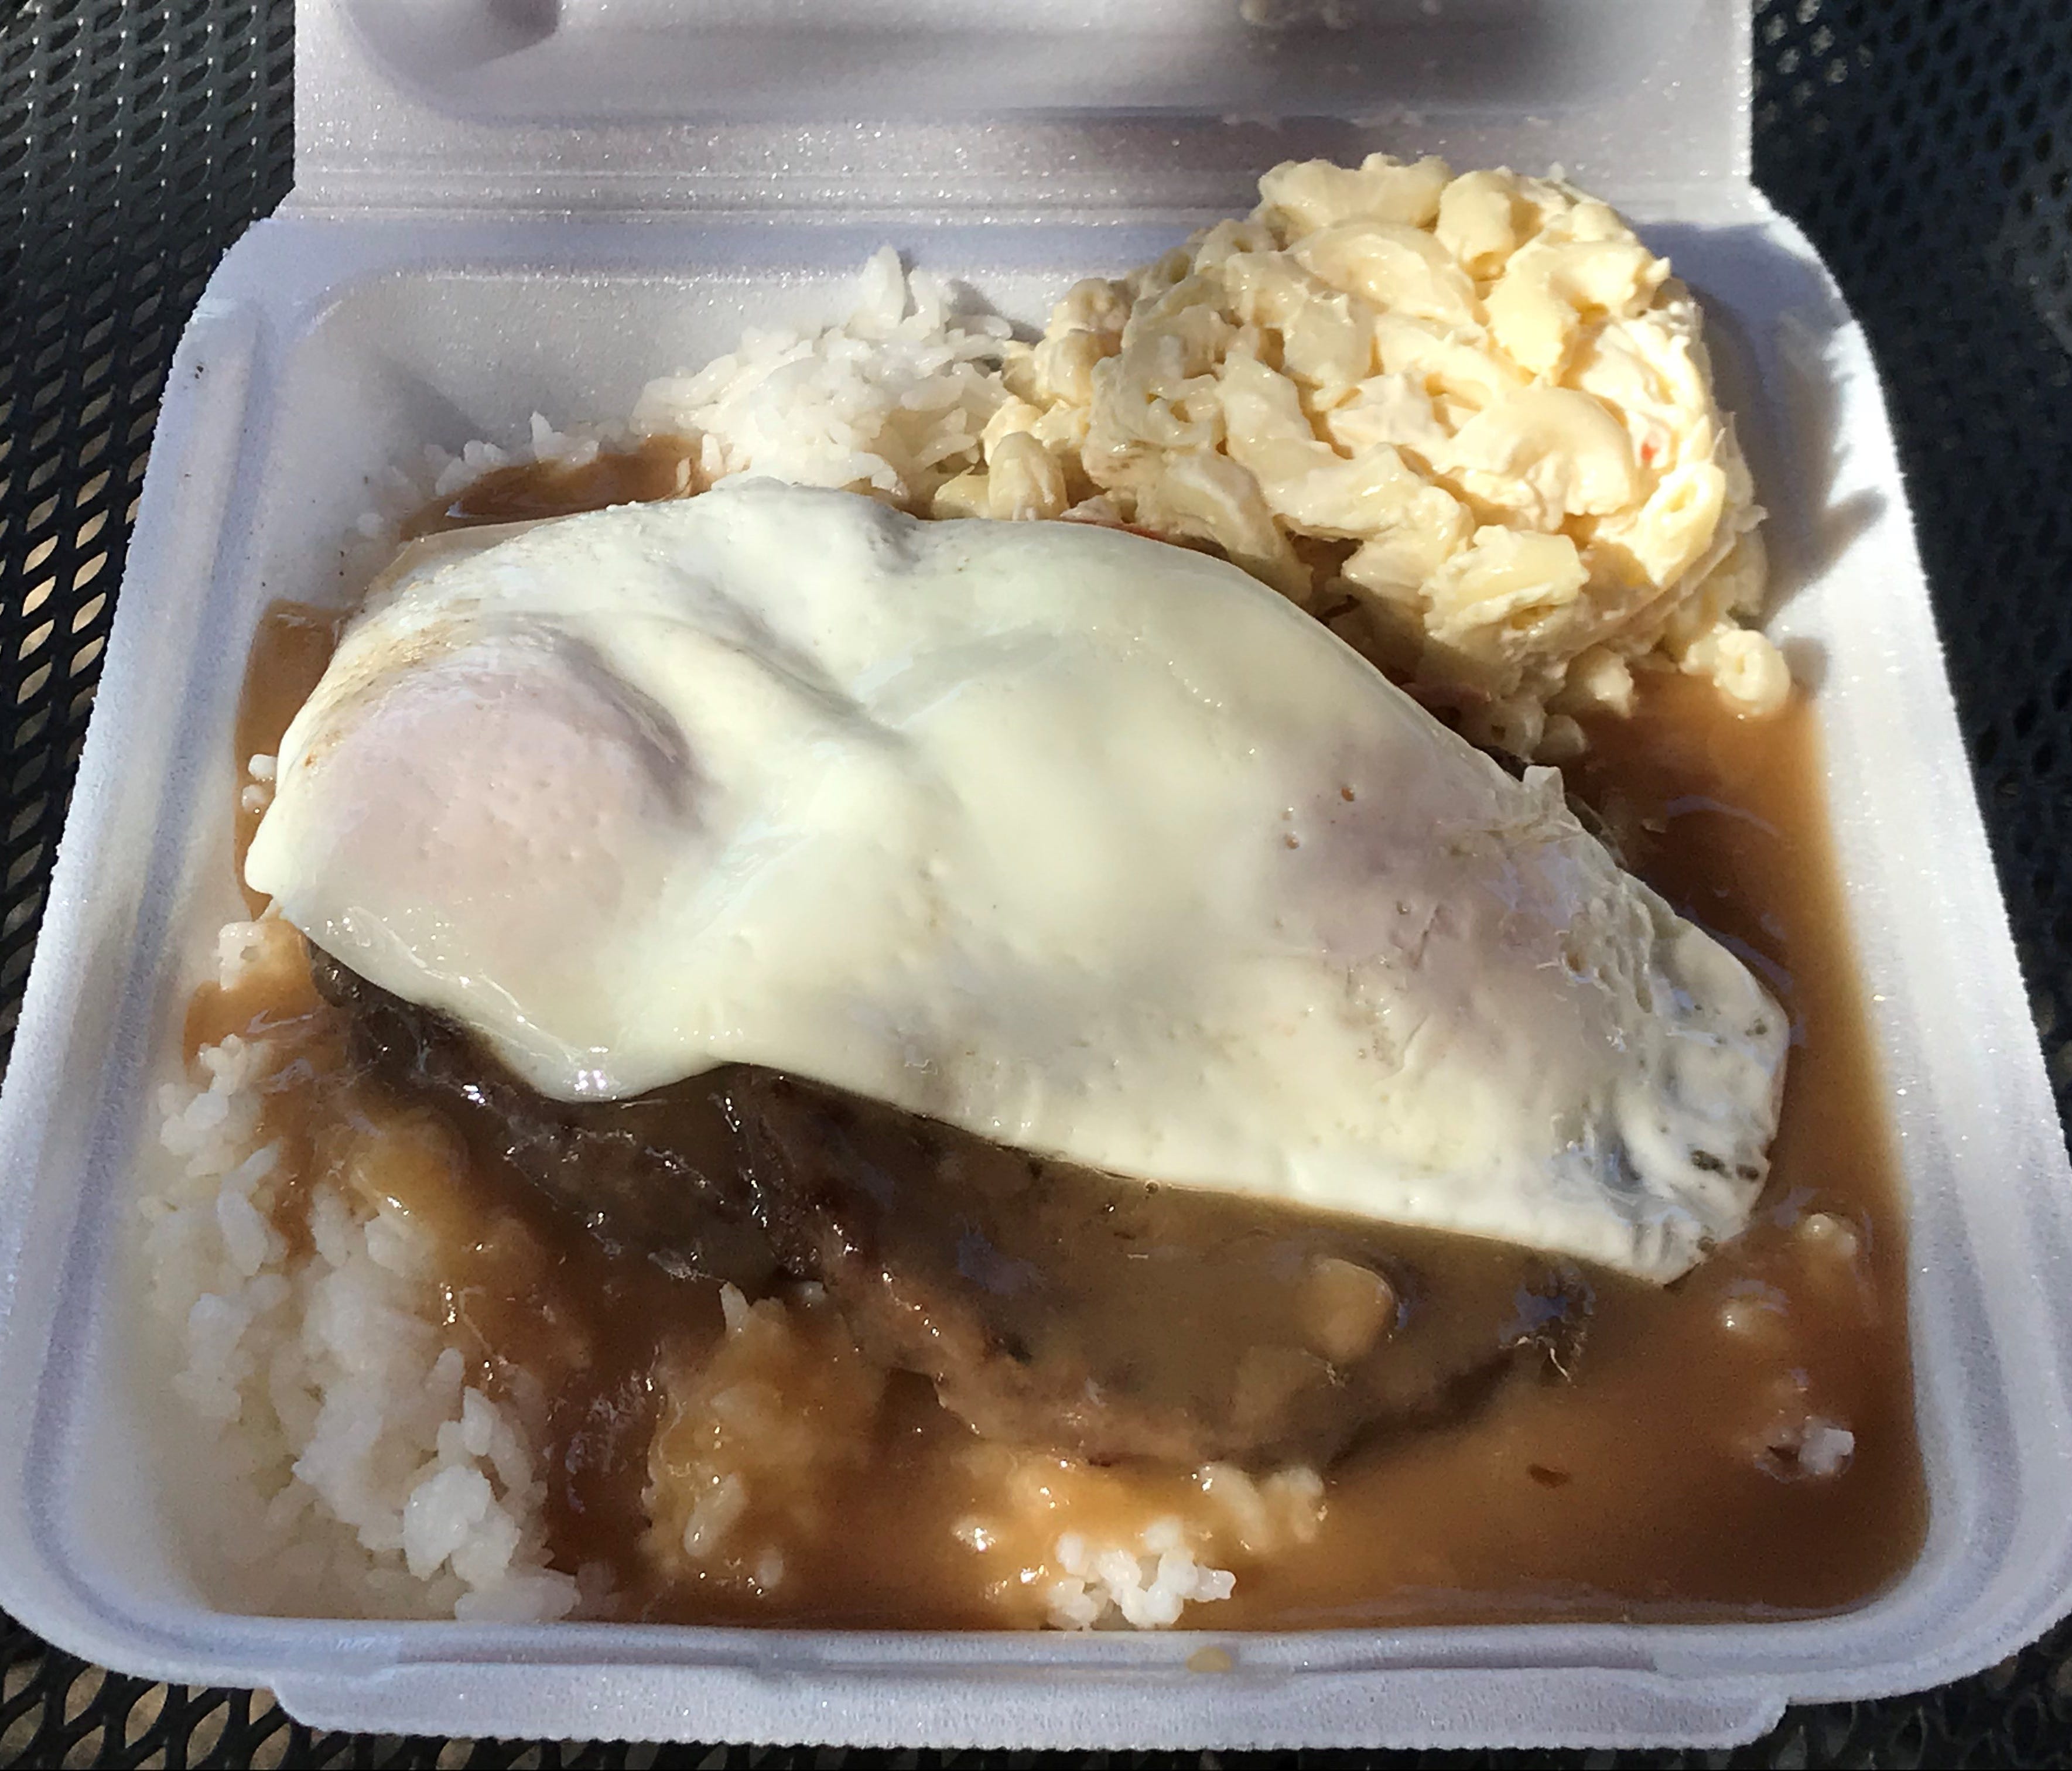 A classic Hawaiian breakfast specialty offered as an all-day plate lunch option is Loco Moco, two hamburger patties topped with brown gravy and fried eggs.